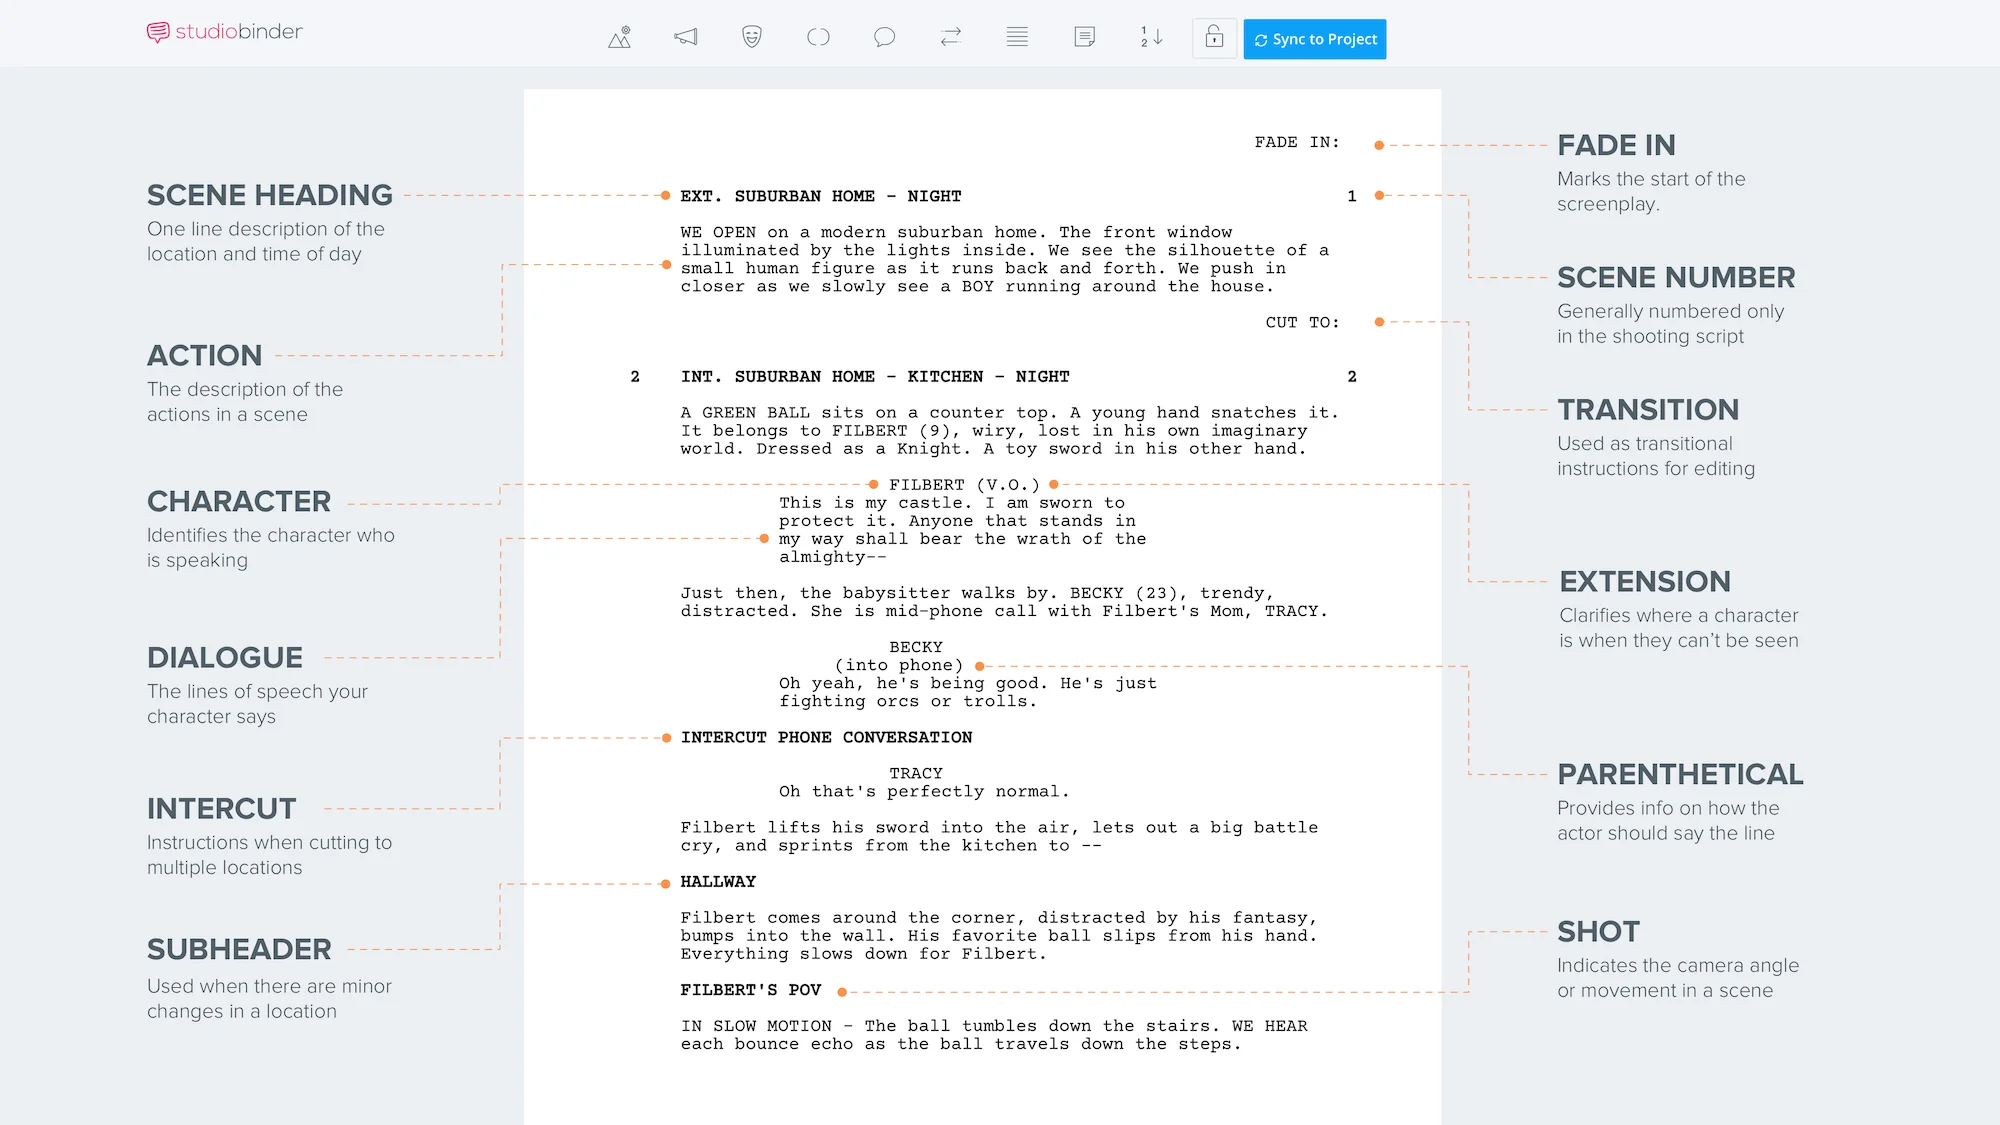 How to Format a Screenplay - StudioBinder Scriptwriting Software